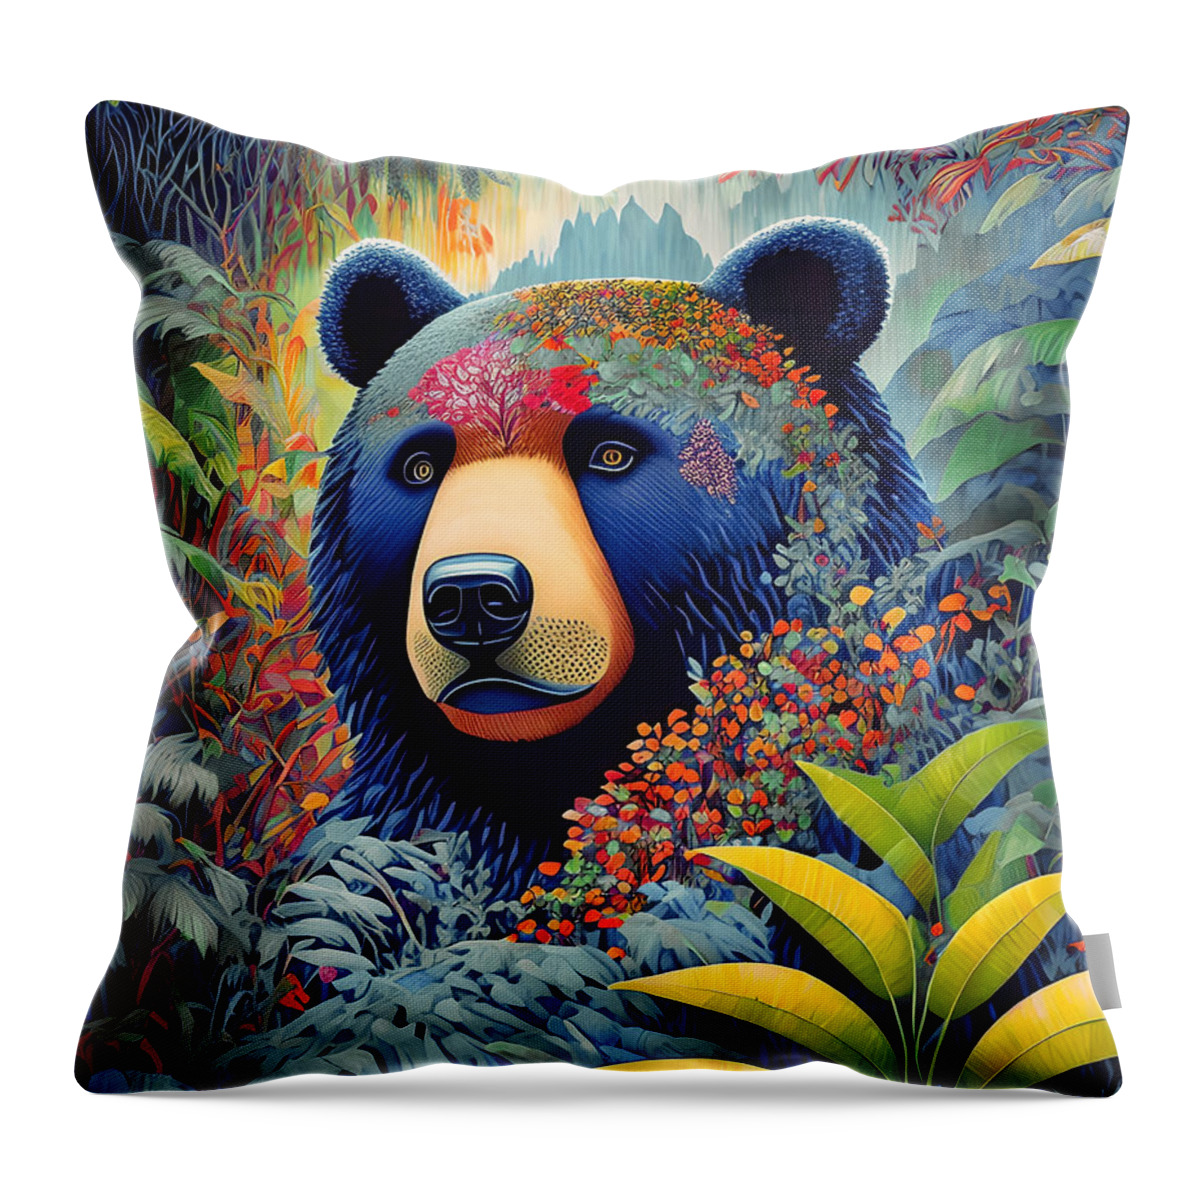 Abstract Throw Pillow featuring the digital art Bear In The Forest - 6SD by Philip Preston